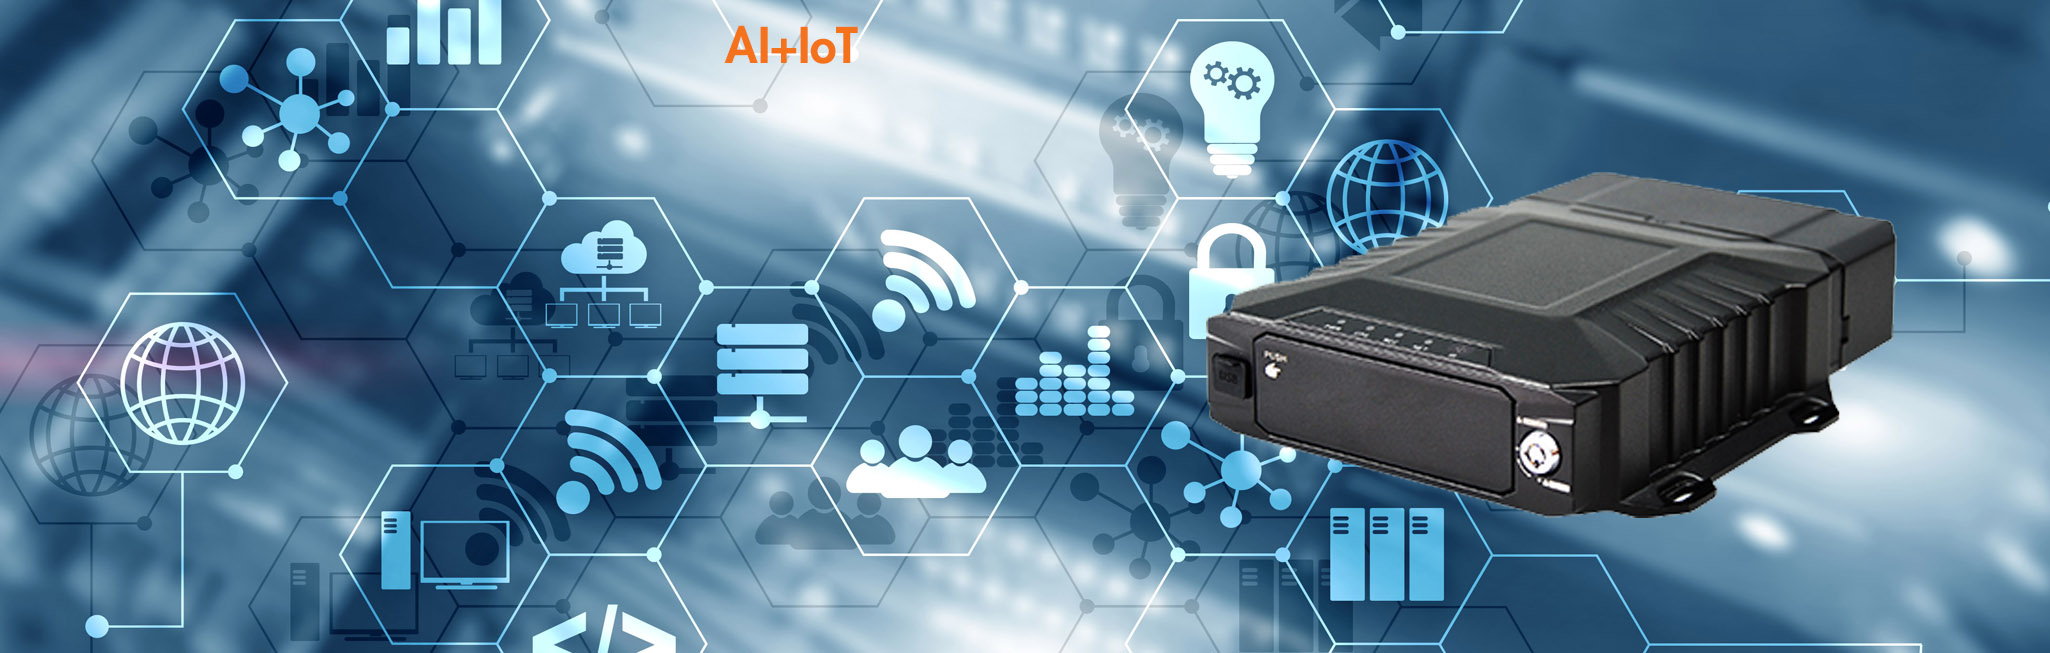 AI and AIoT MDVR at https://www.spt-iot.com